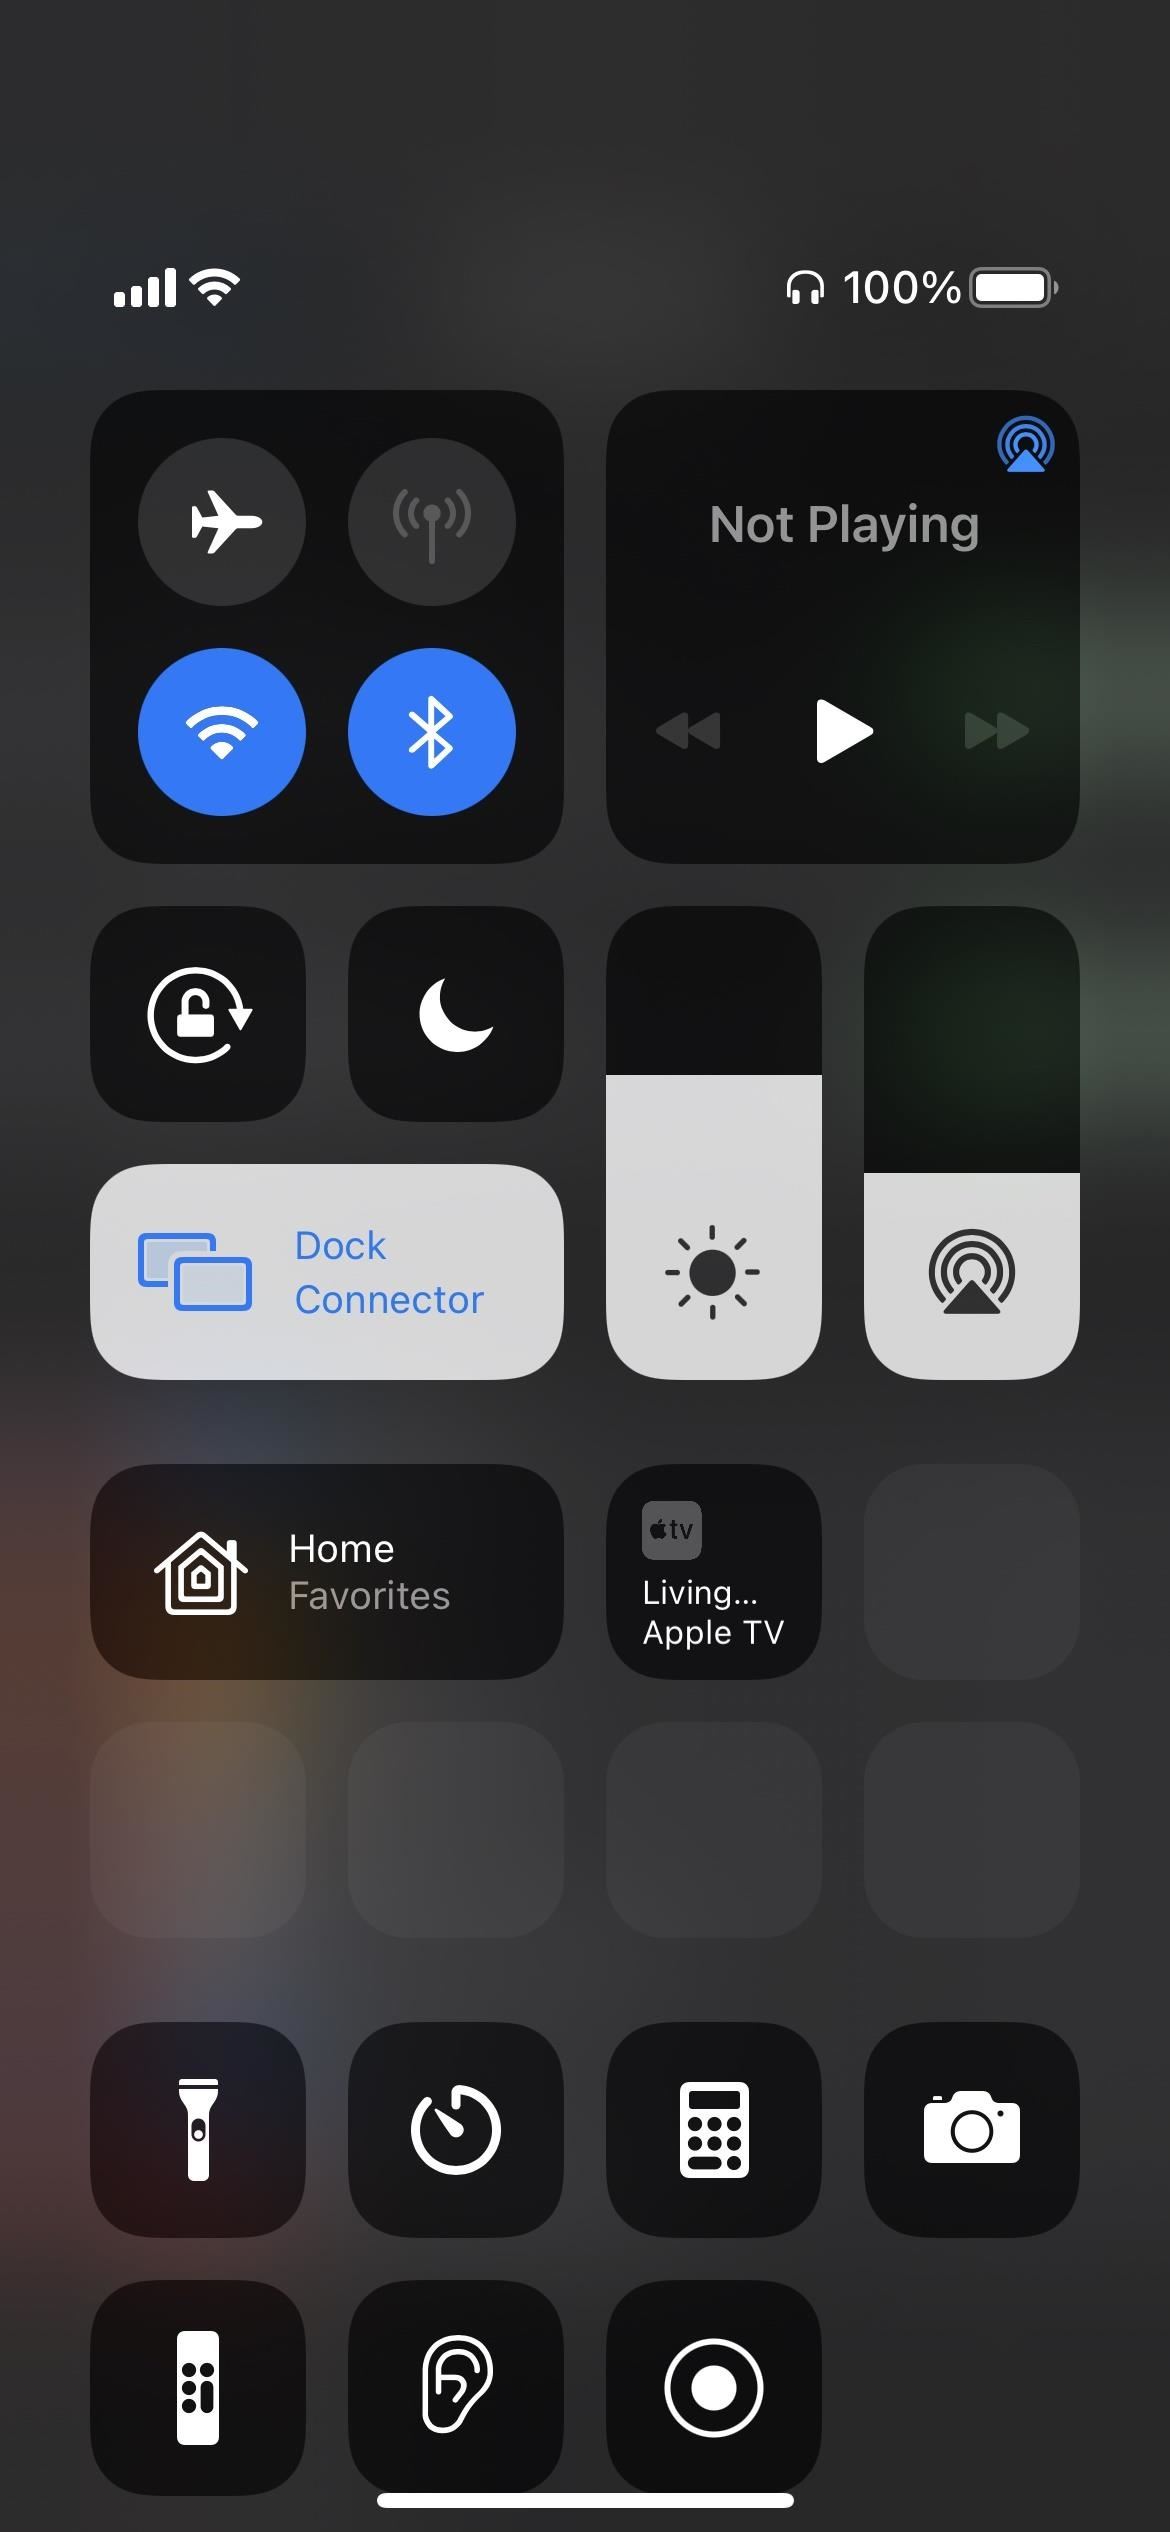 Blank Squares Filling Up Control Center? Here's How to Remove Them or Fill Them Up on Your iPhone